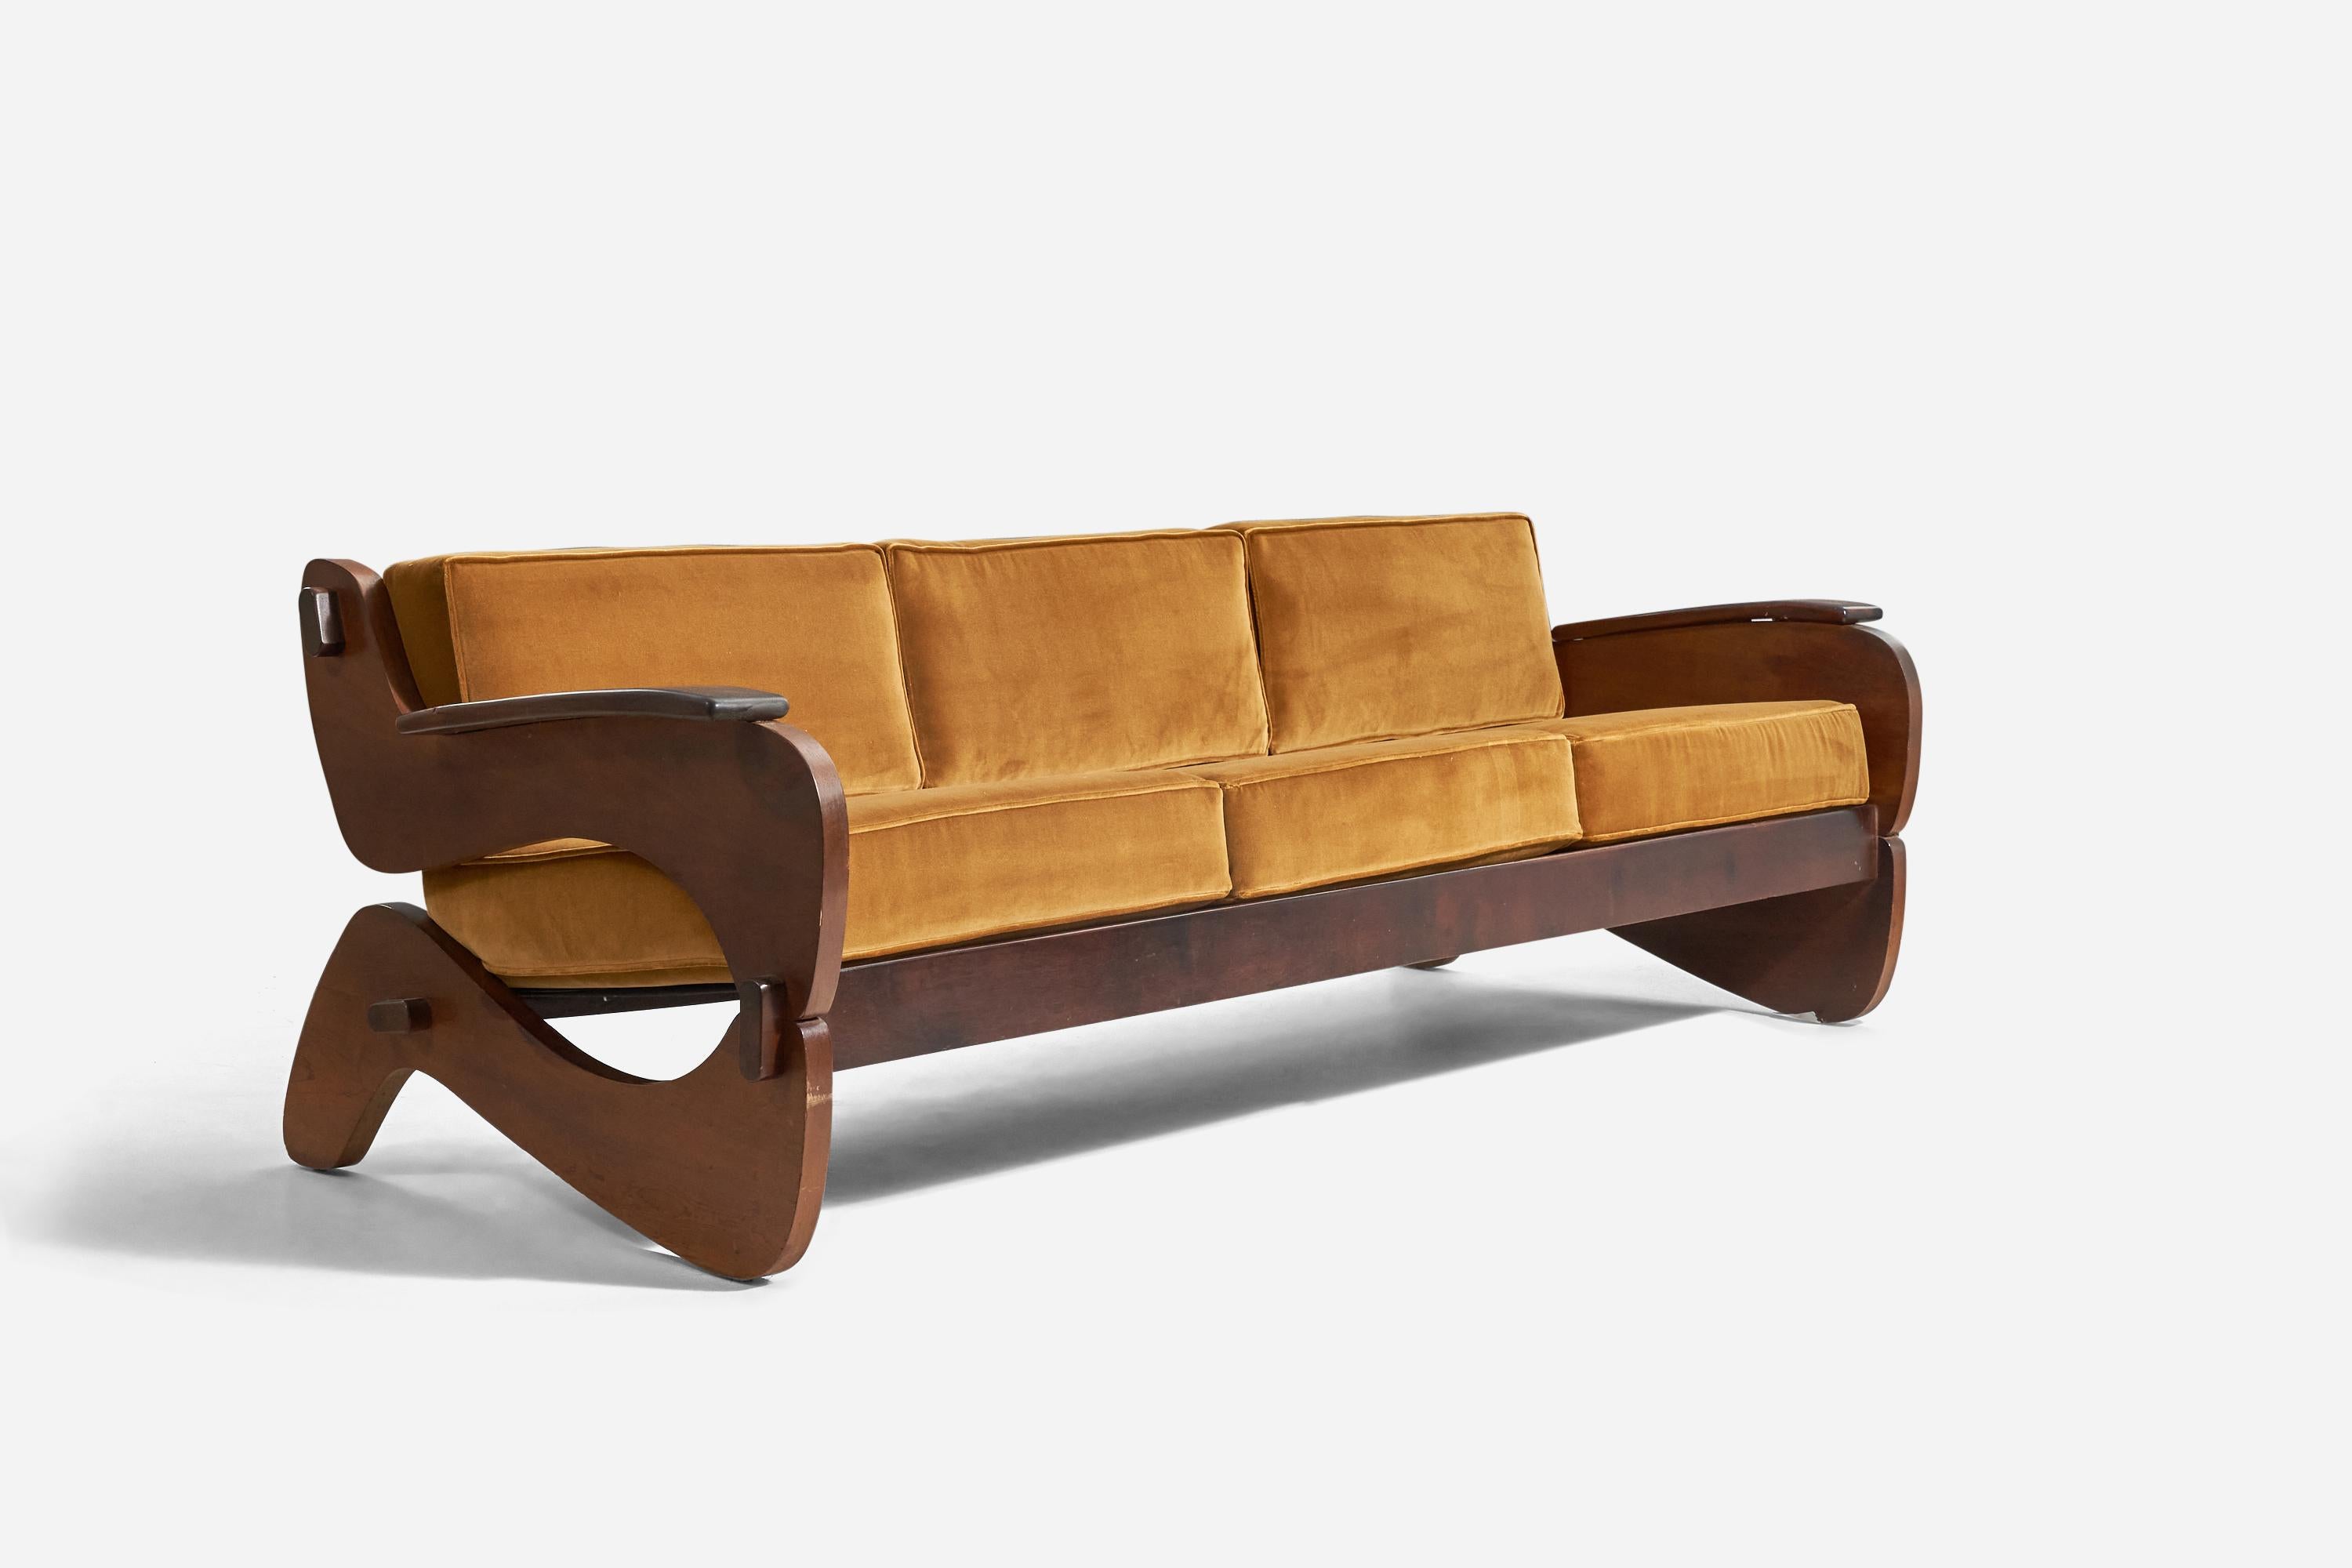 A wood and velvet sofa designed and produced by Grafton Everest, South Africa, c. 1970s.